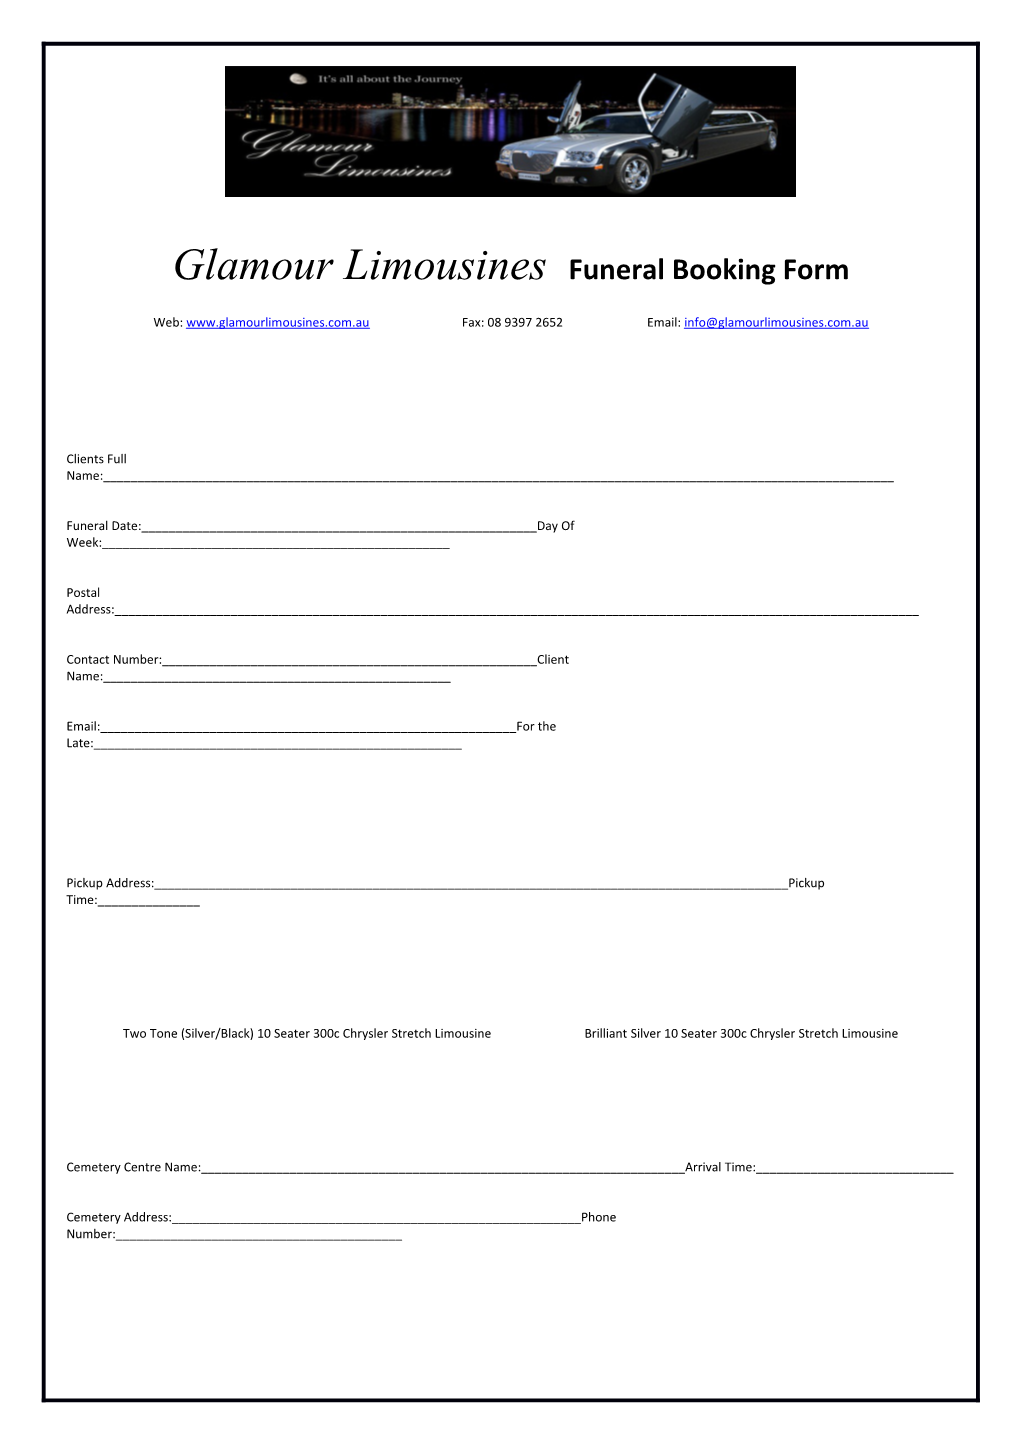 Glamour Limousines Funeral Booking Form